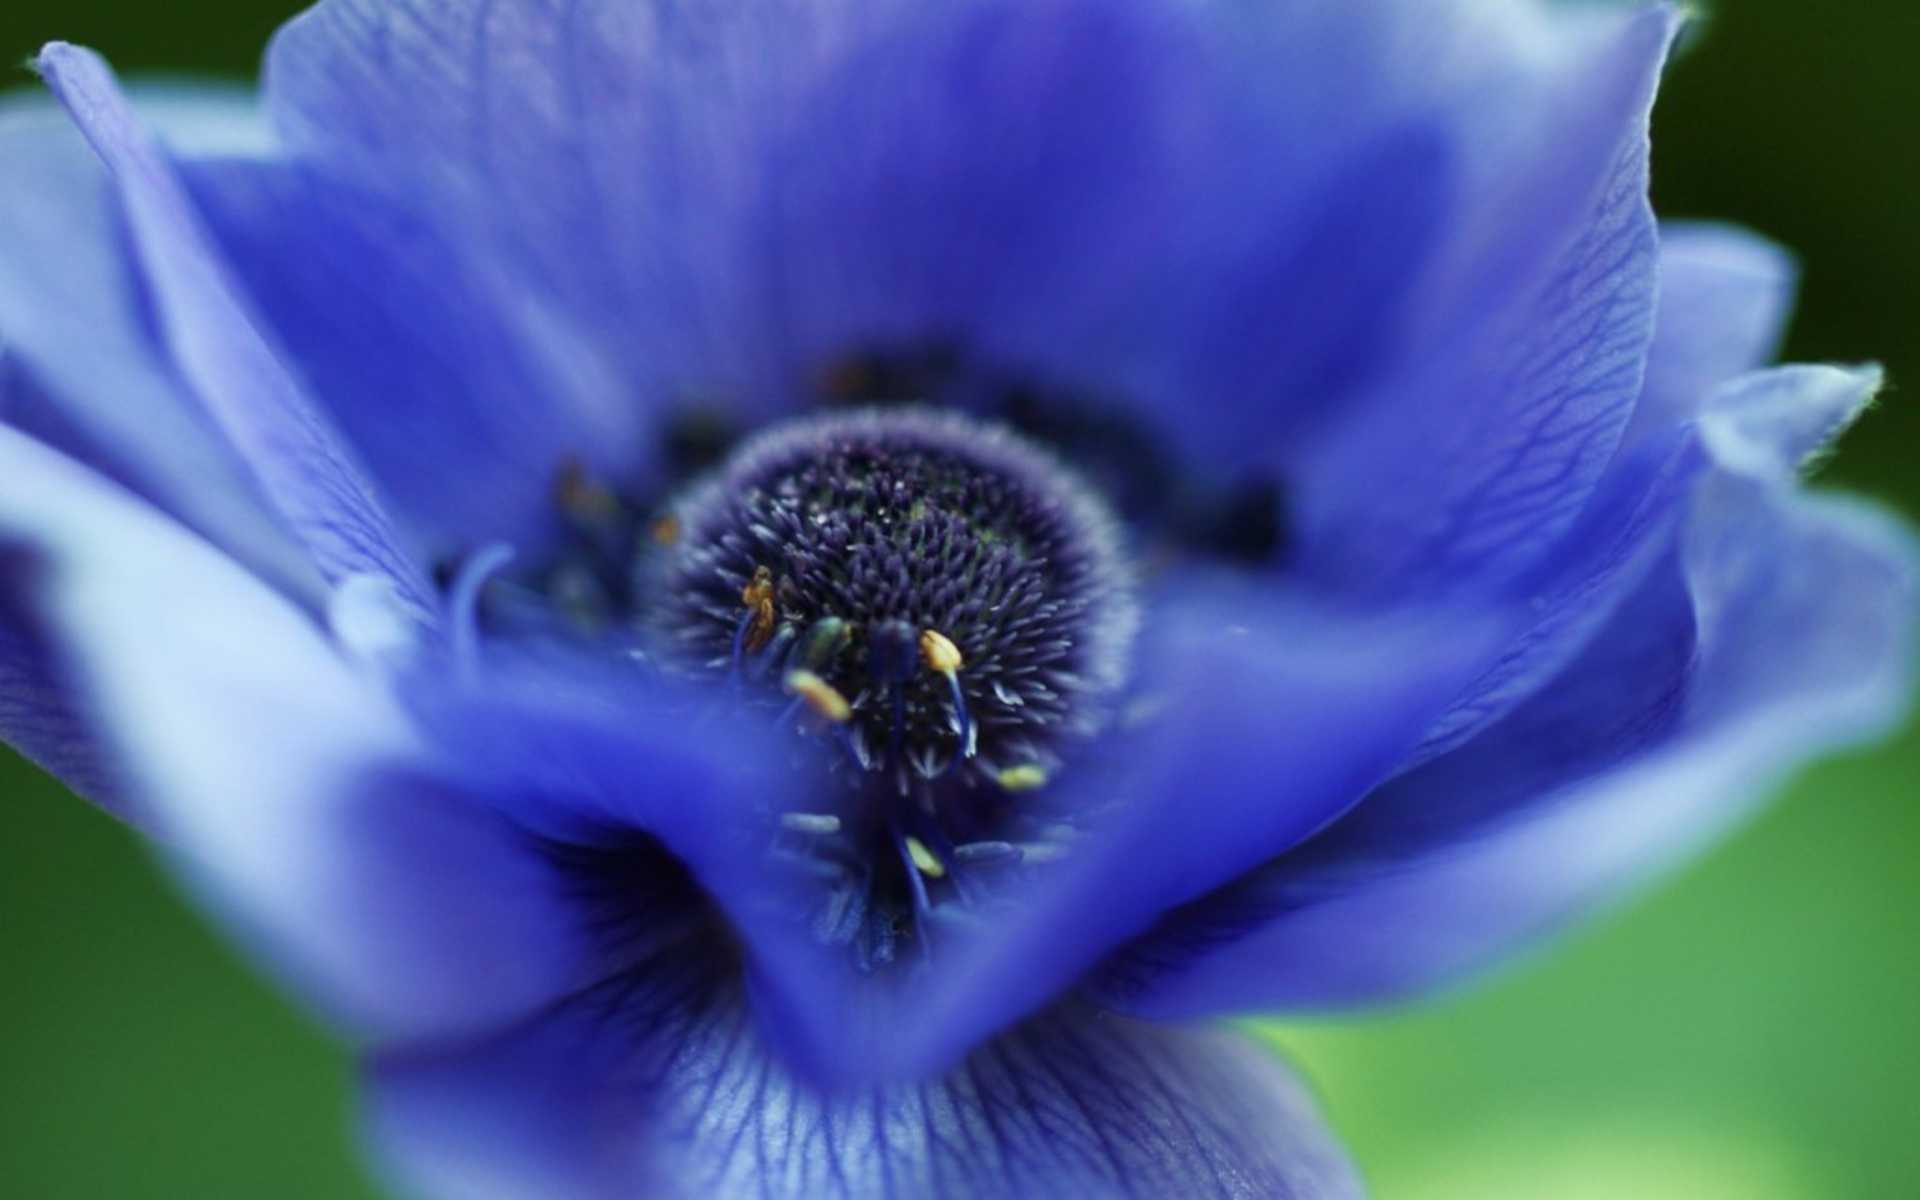 DOWNLOAD: anemone flower blue rose macro free picture 2560 x 1600